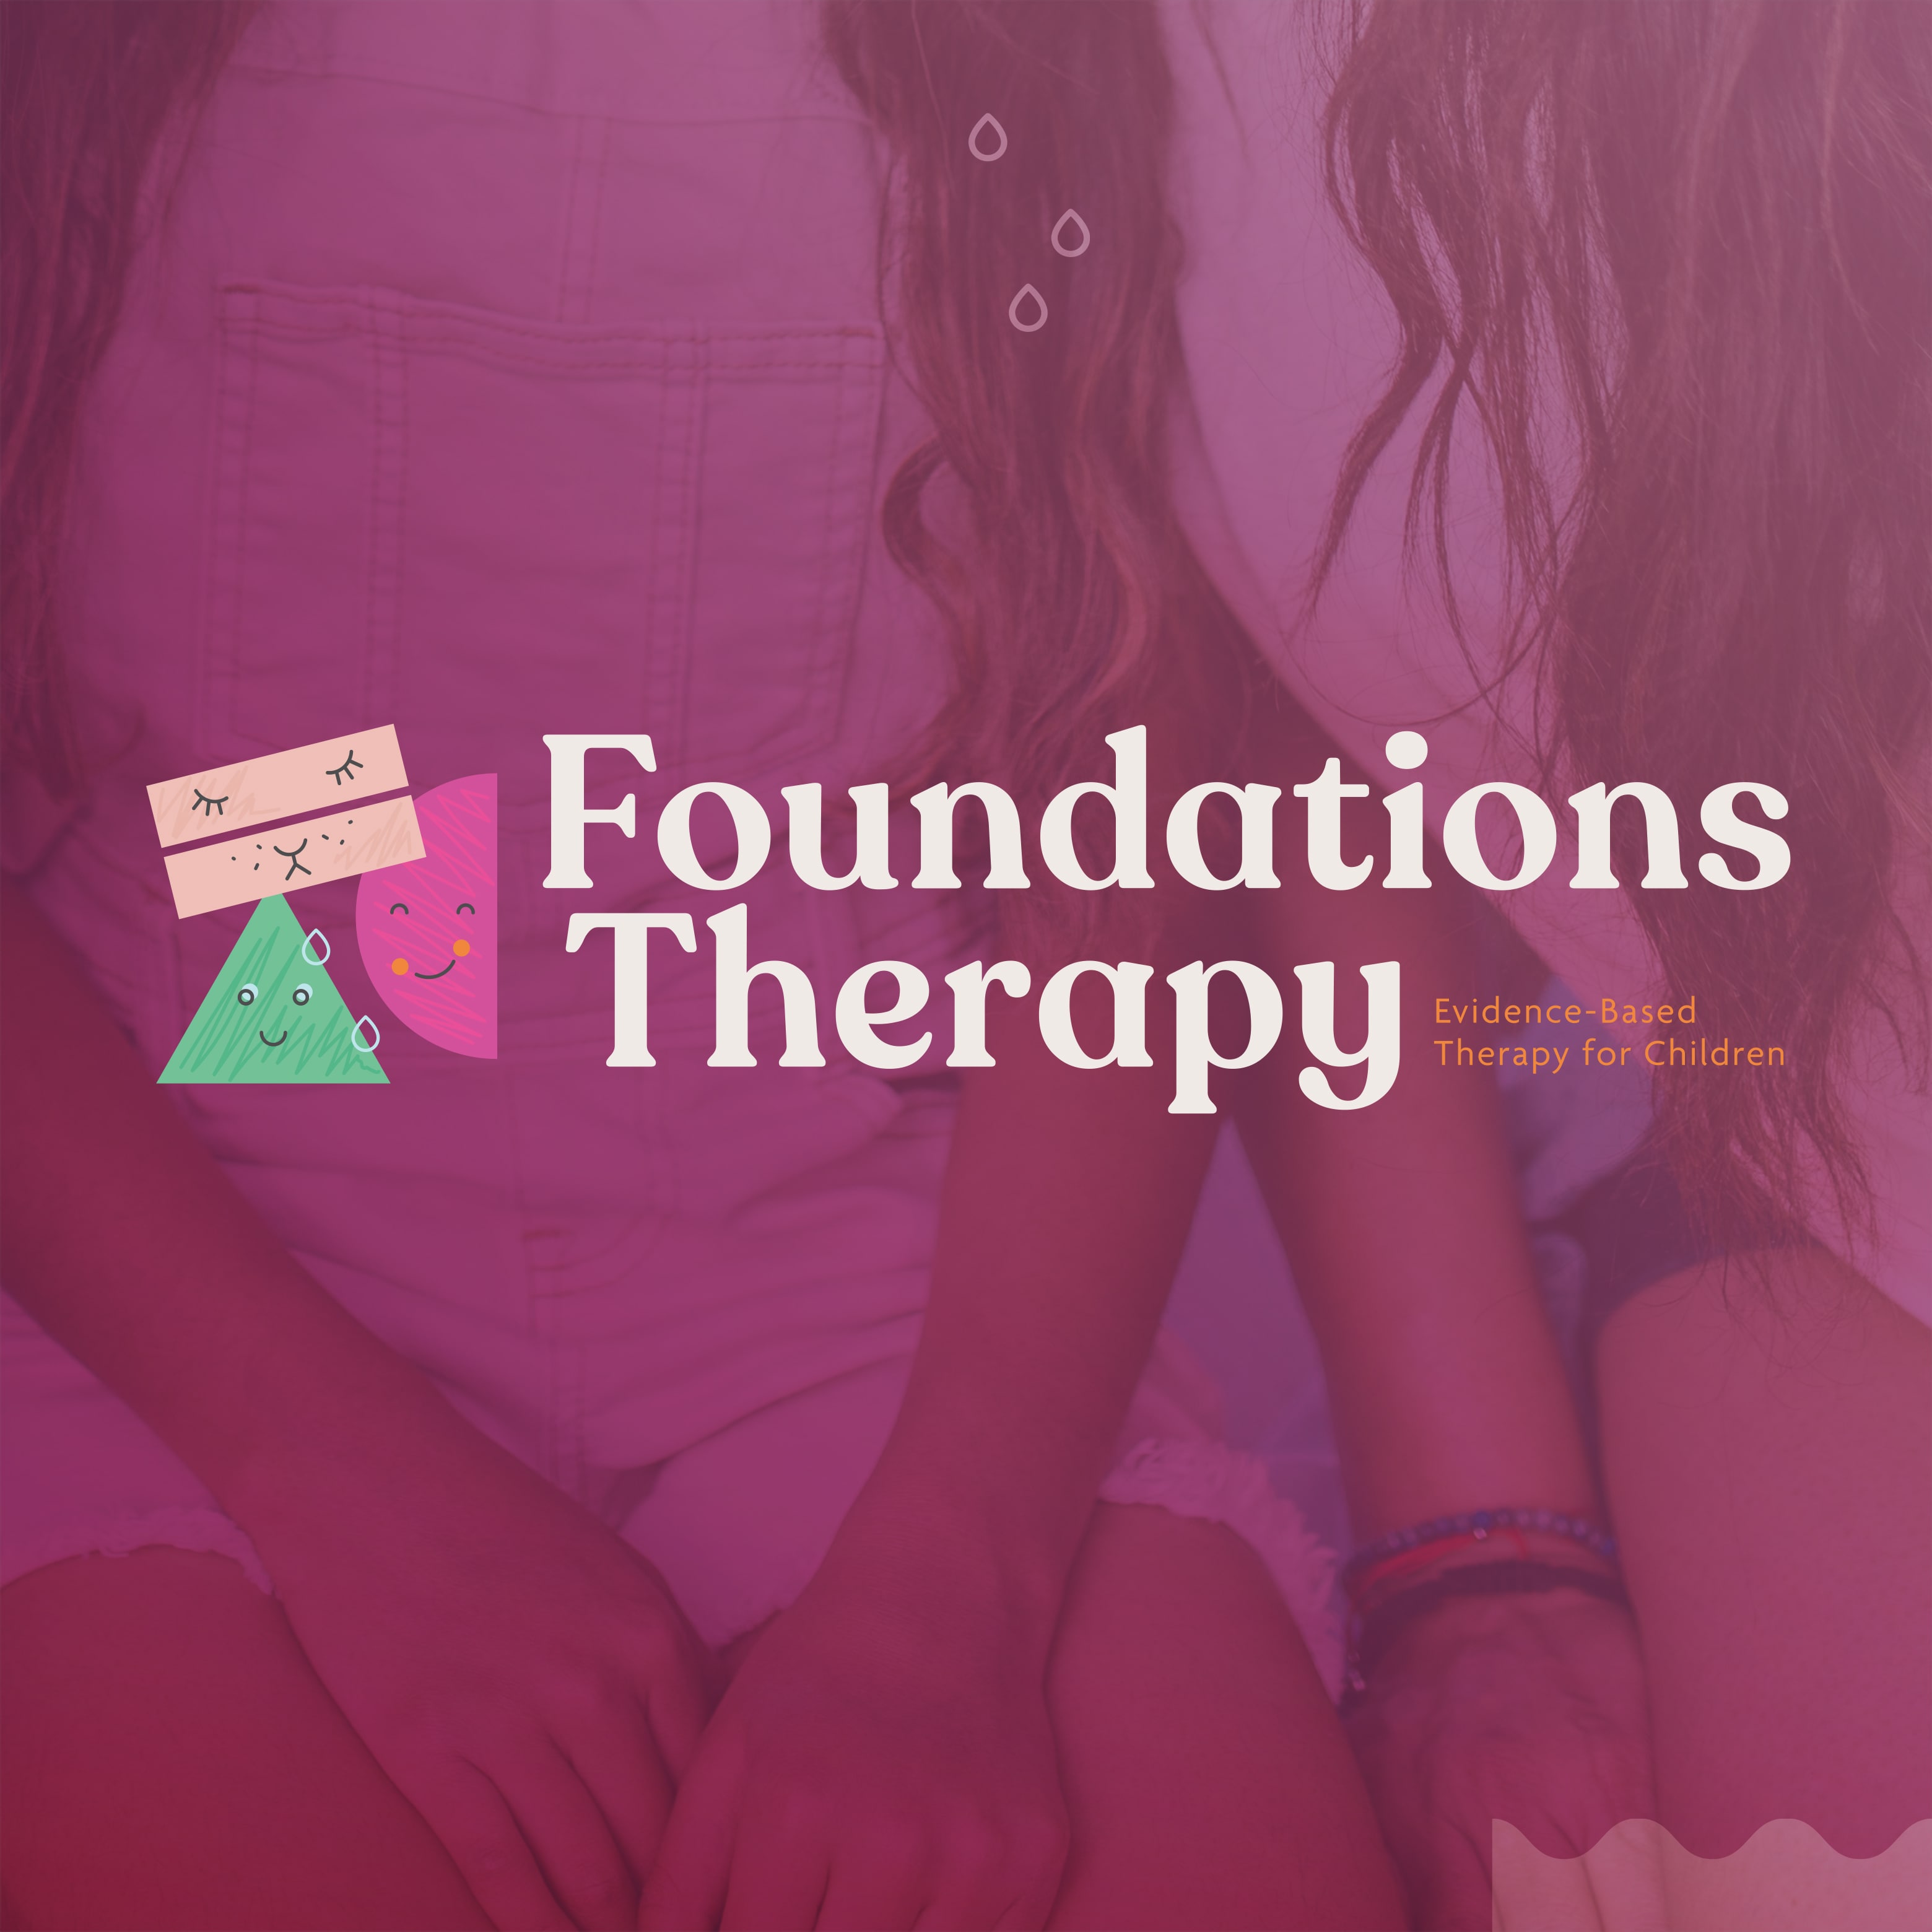 Foundations Therapy